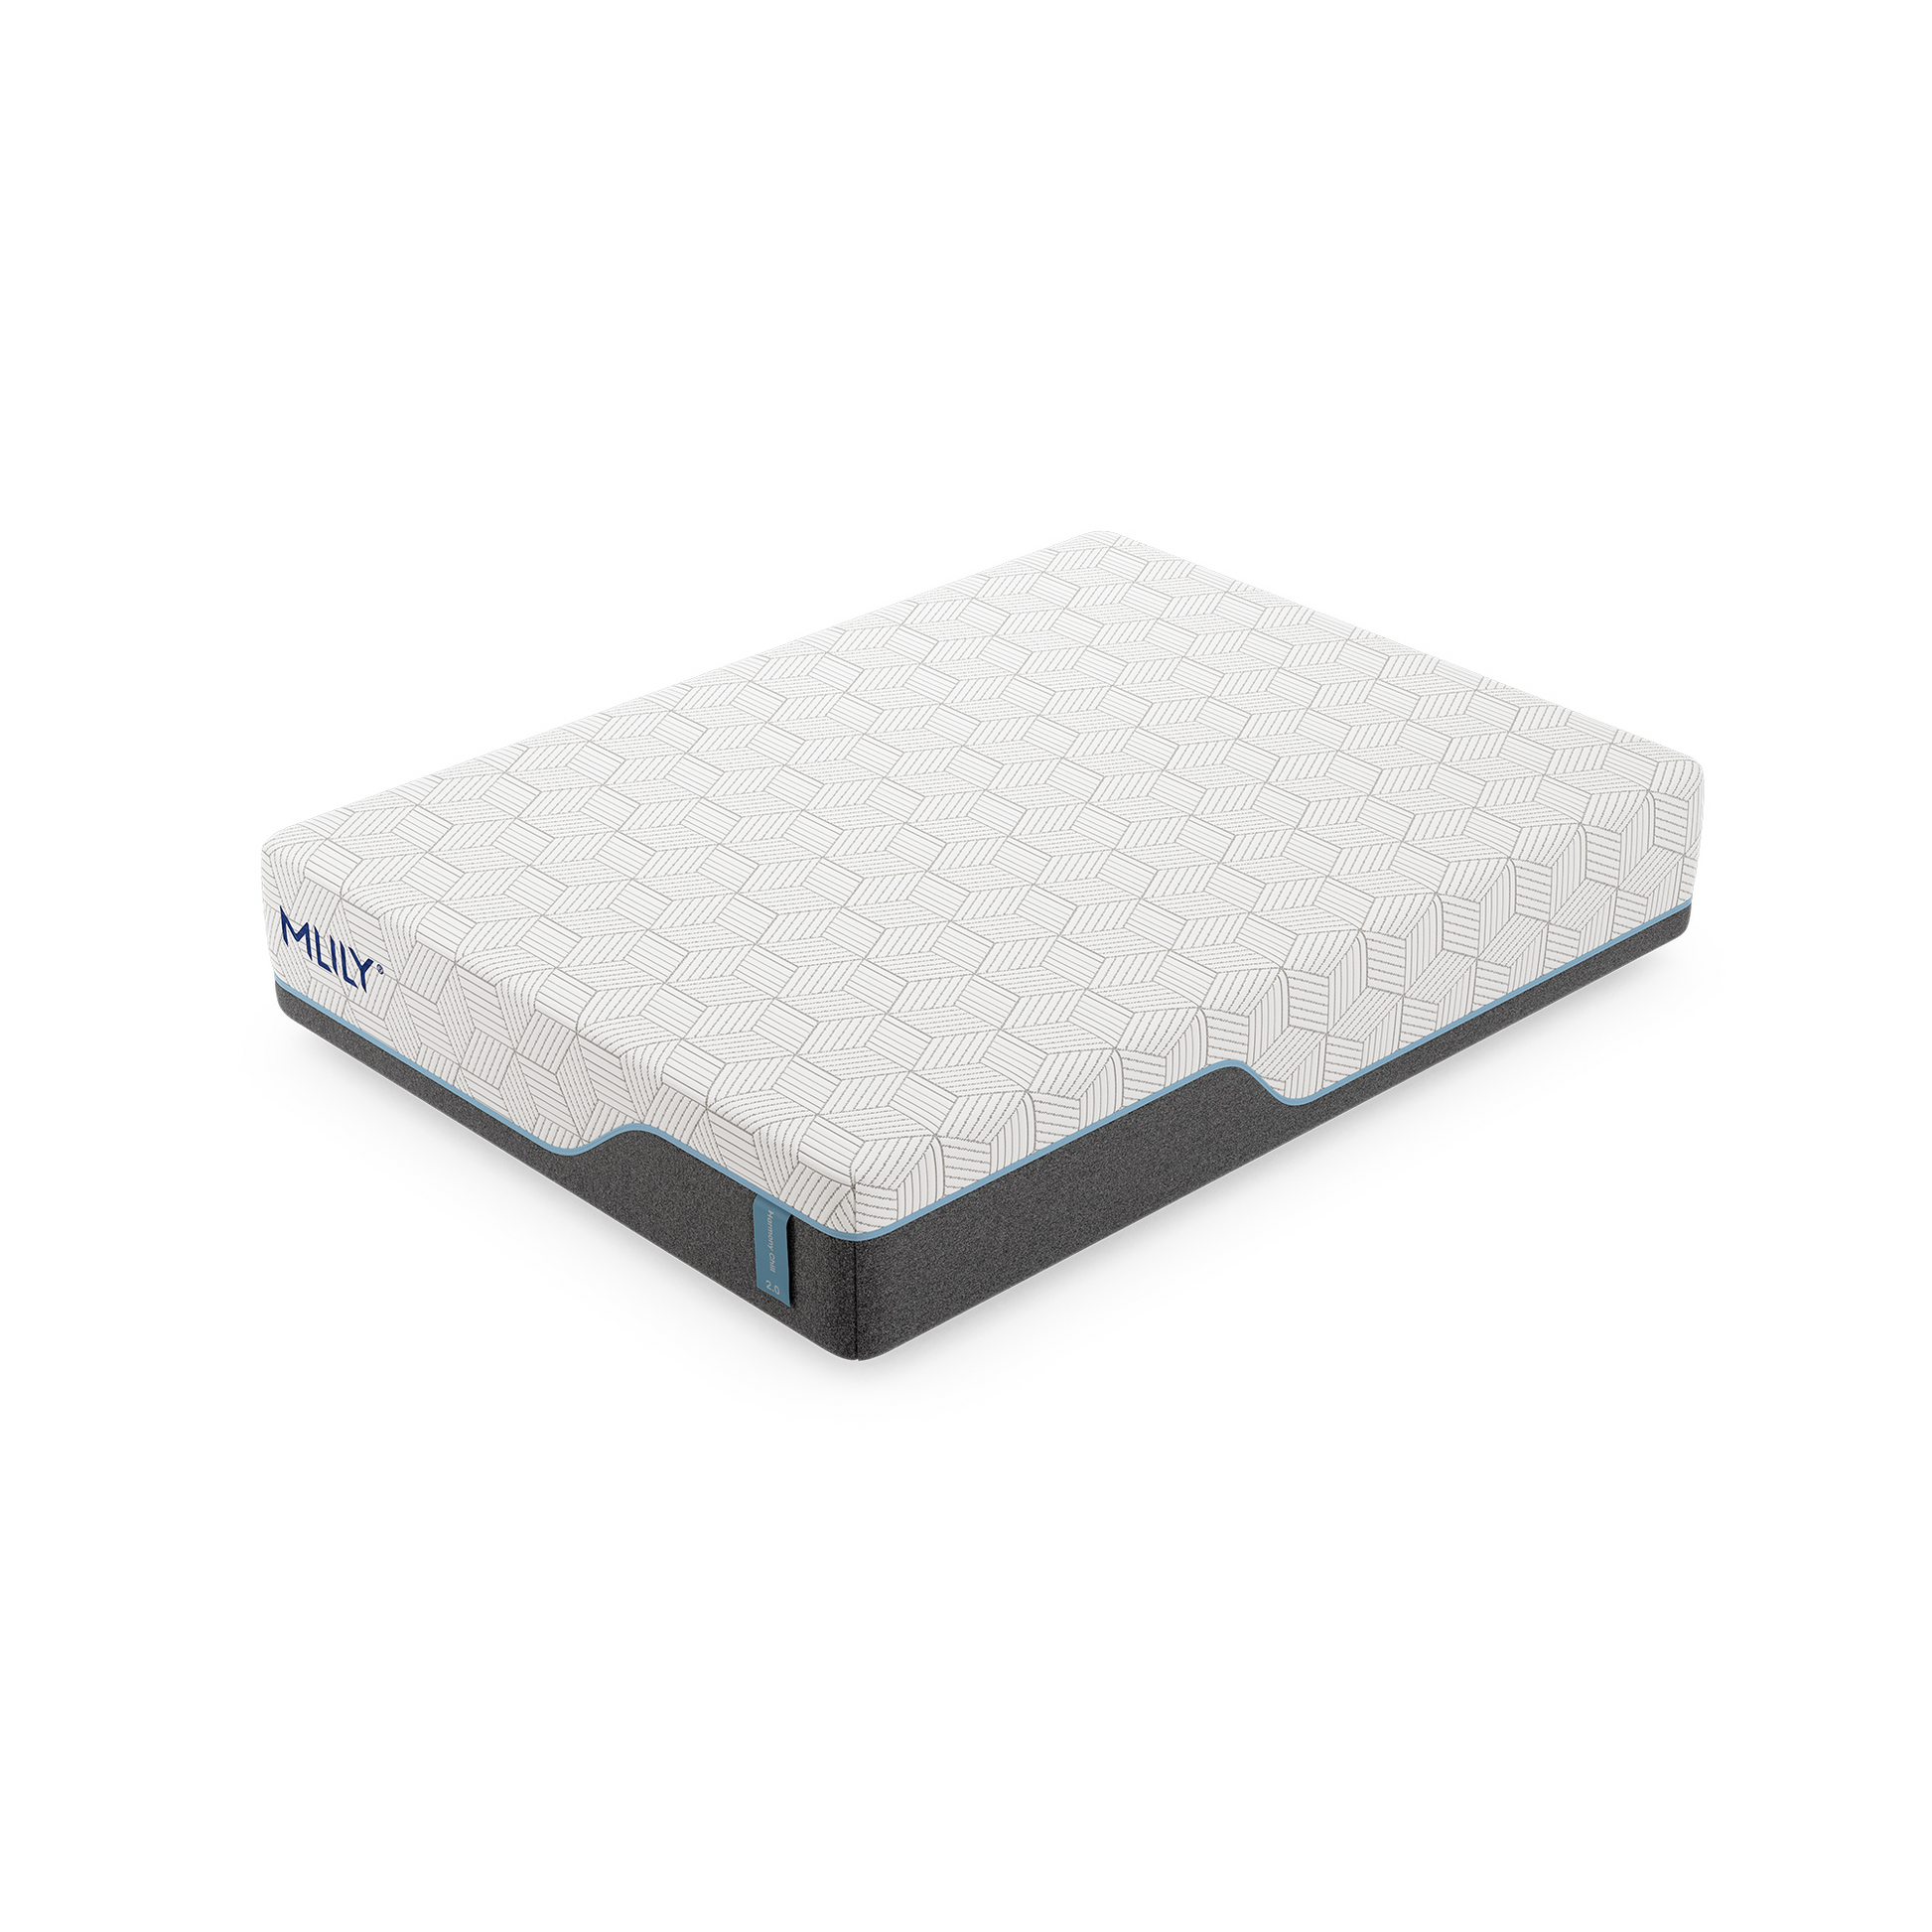 Harmony Chill 2.0 13" Memory Foam Mattress With Advanced Temperature Regulation, Corner View, Right Side, Zoomed Out